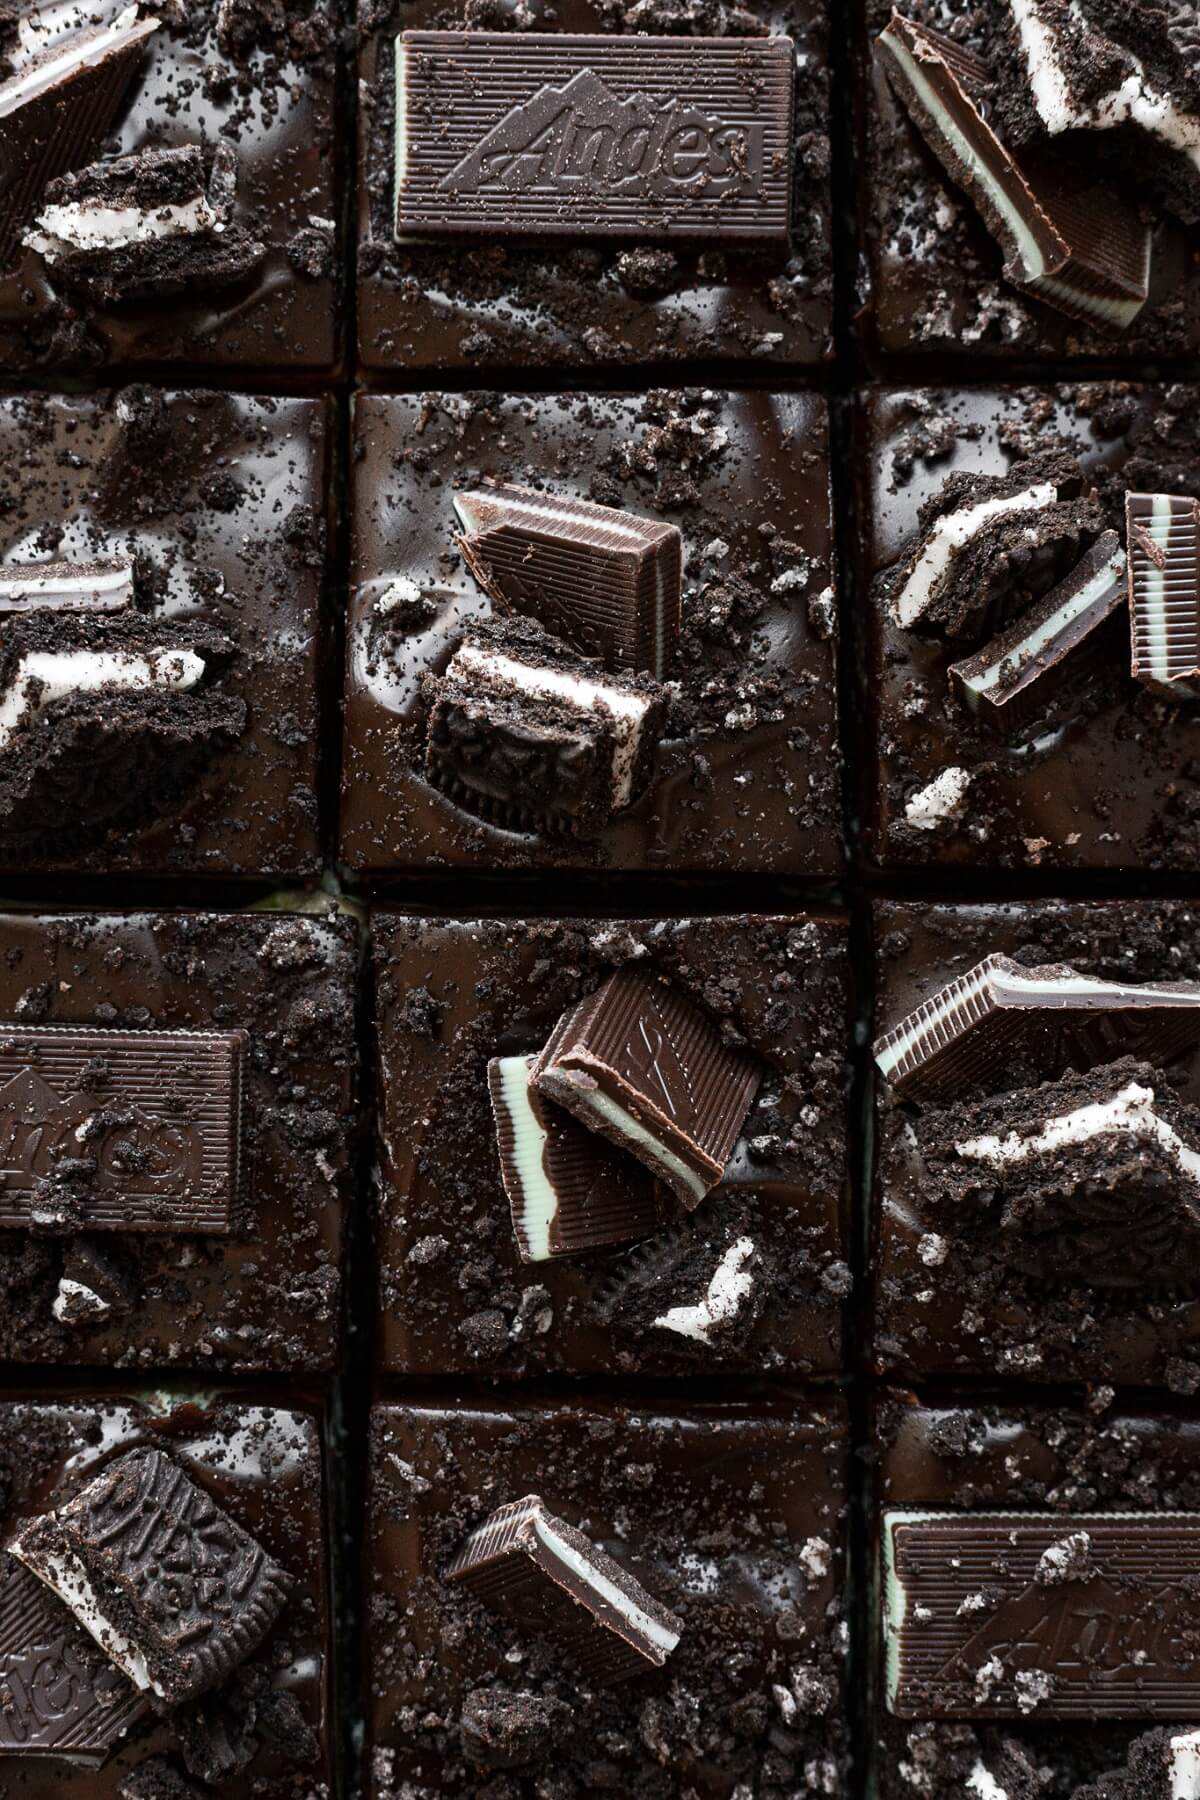 Mint Oreo brownies cut into squares.